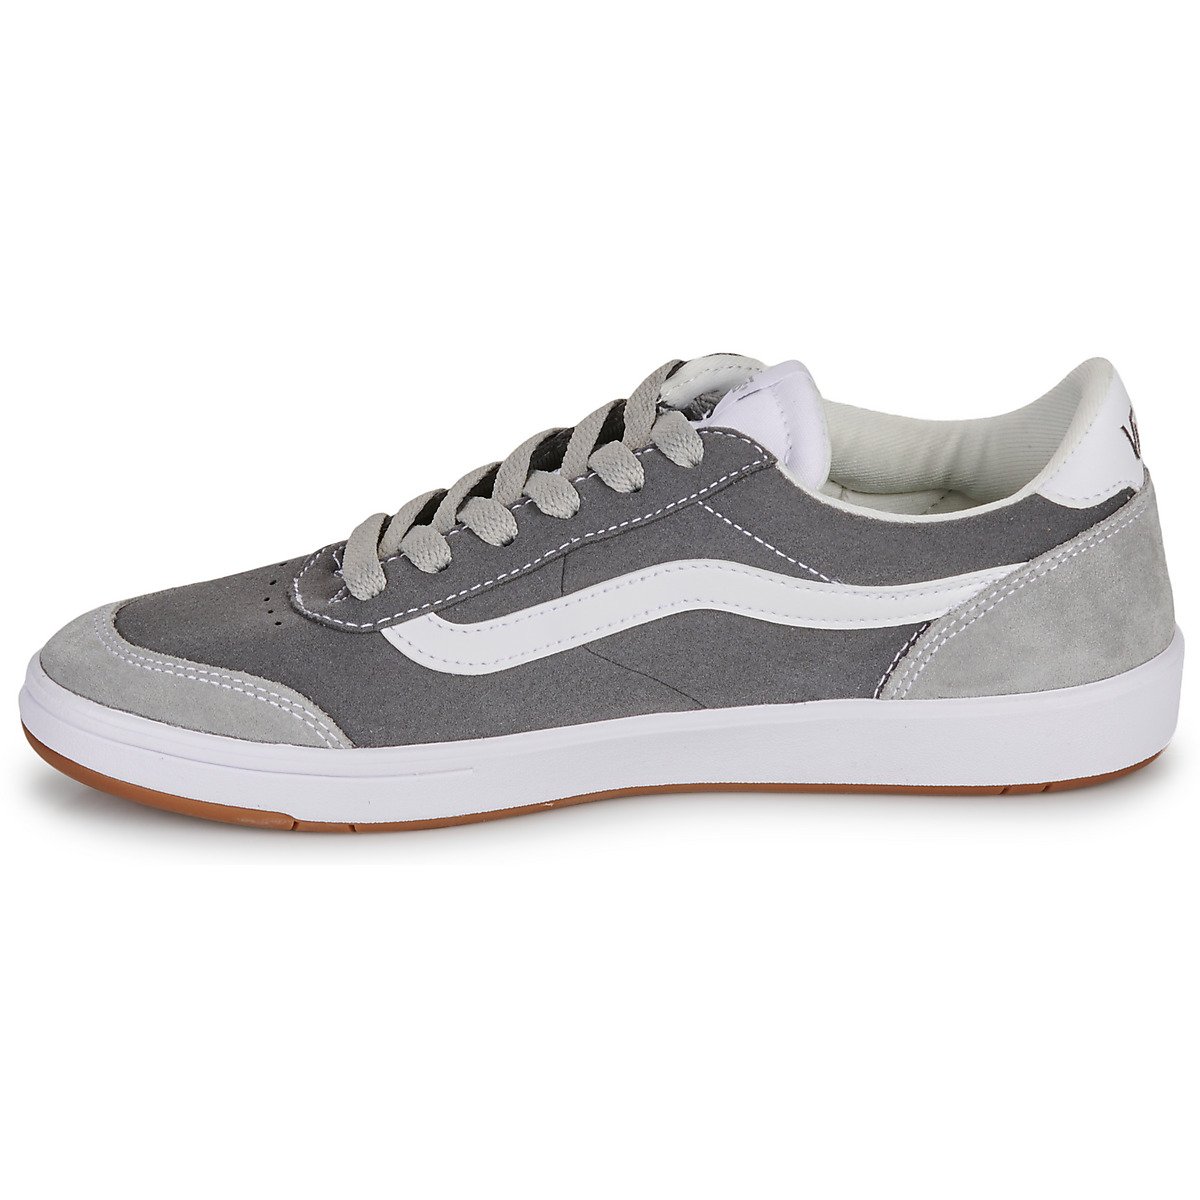 Shoes (Trainers) Cruze Too CC 2-TONE SUEDE PEWTER